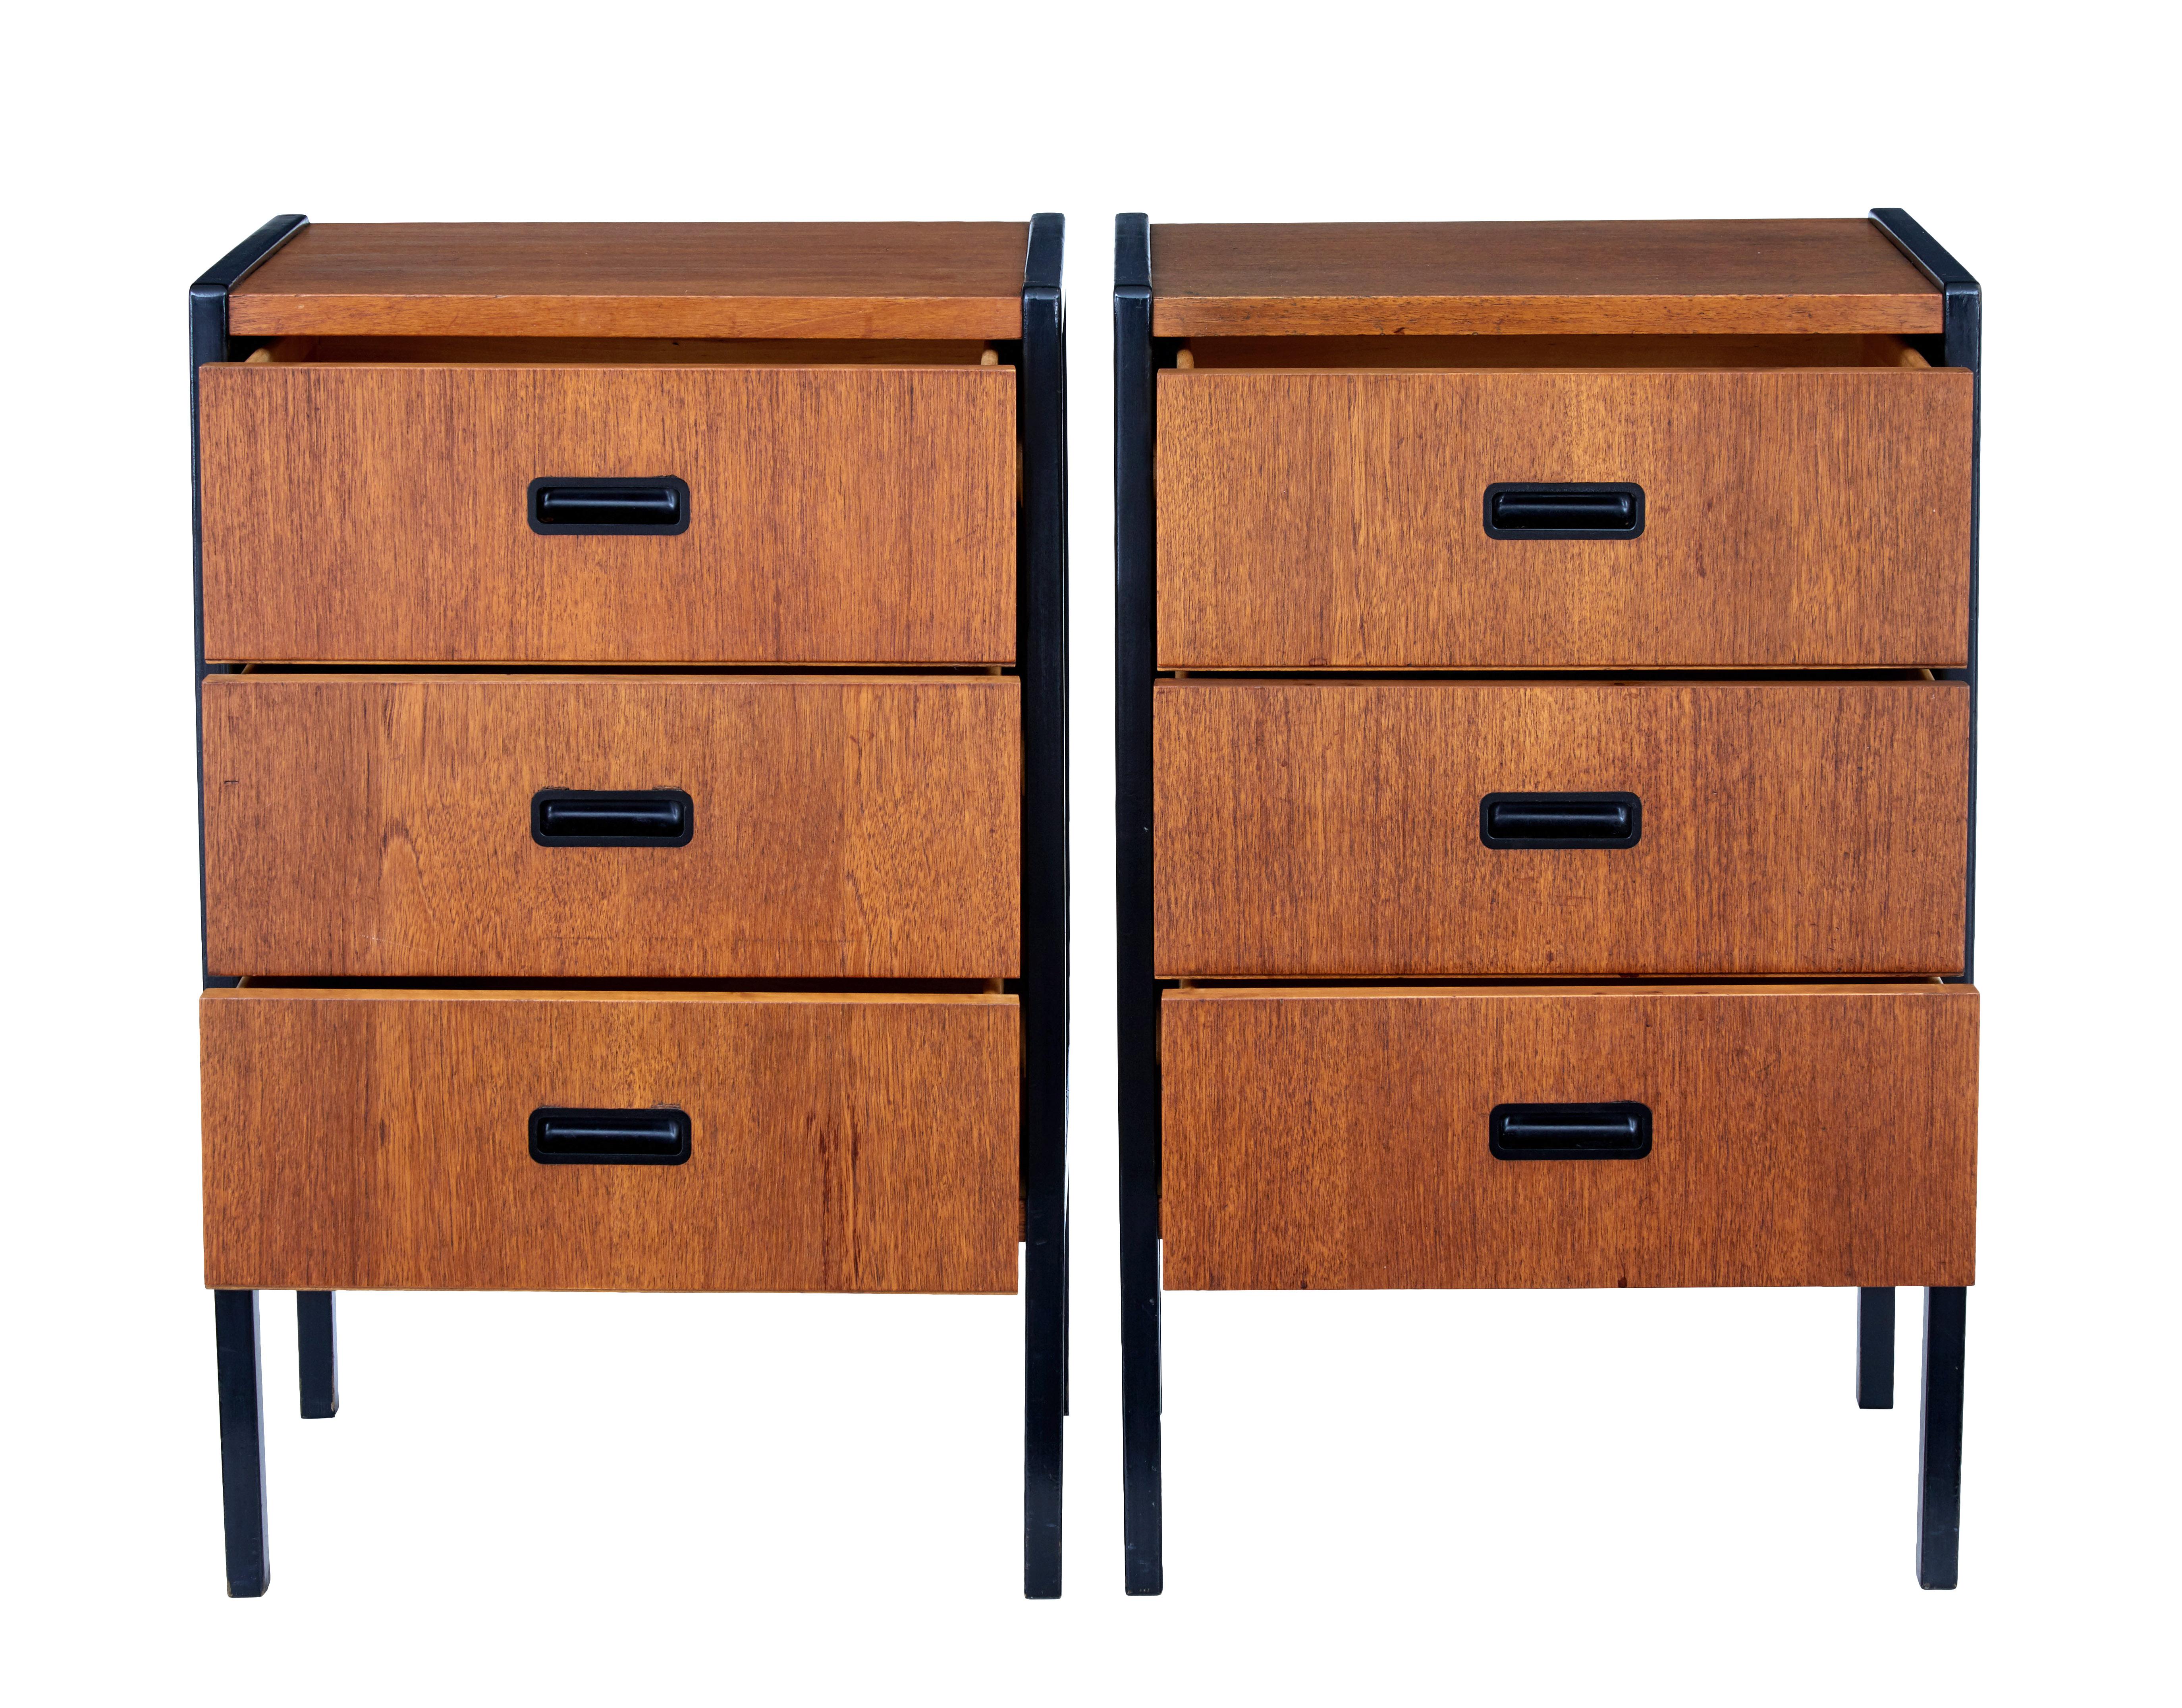 Stylish pair of Swedish teak bedside drawers, circa 1960.

Made and labelled by Swedish company Bodafors. 3 drawers with inset black handles, complemented by the exterior ebonized frame.

Surface staining to top, minor wear to ebonised areas.